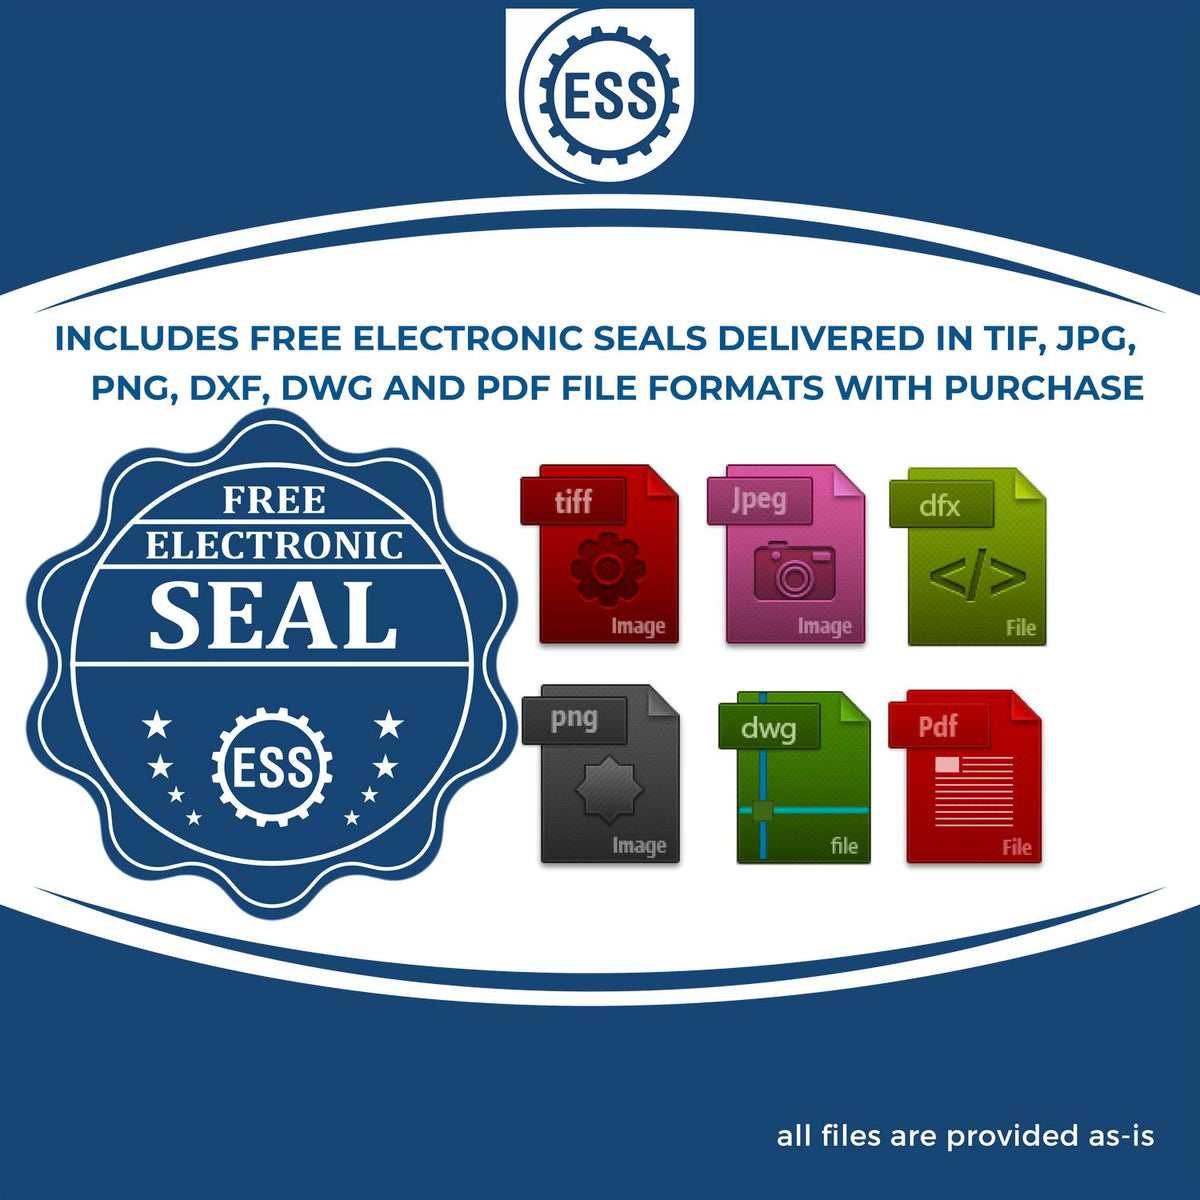 An infographic for the free electronic seal for the Heavy Duty Cast Iron Alaska Engineer Seal Embosser illustrating the different file type icons such as DXF, DWG, TIF, JPG and PNG.